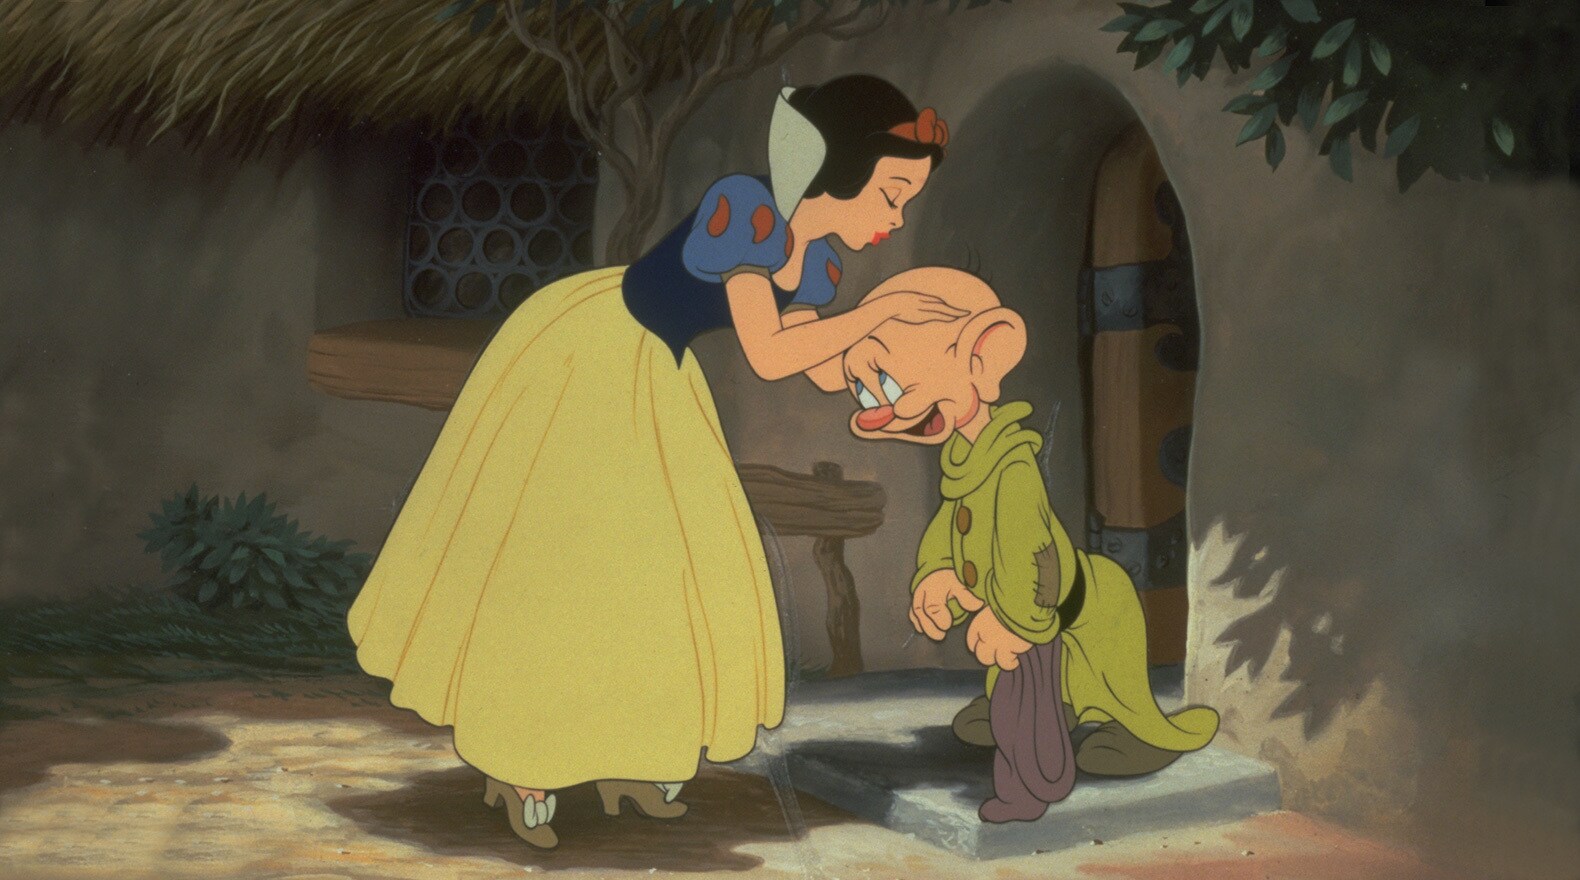 Dopey never says a word, but he inspires many smiles.